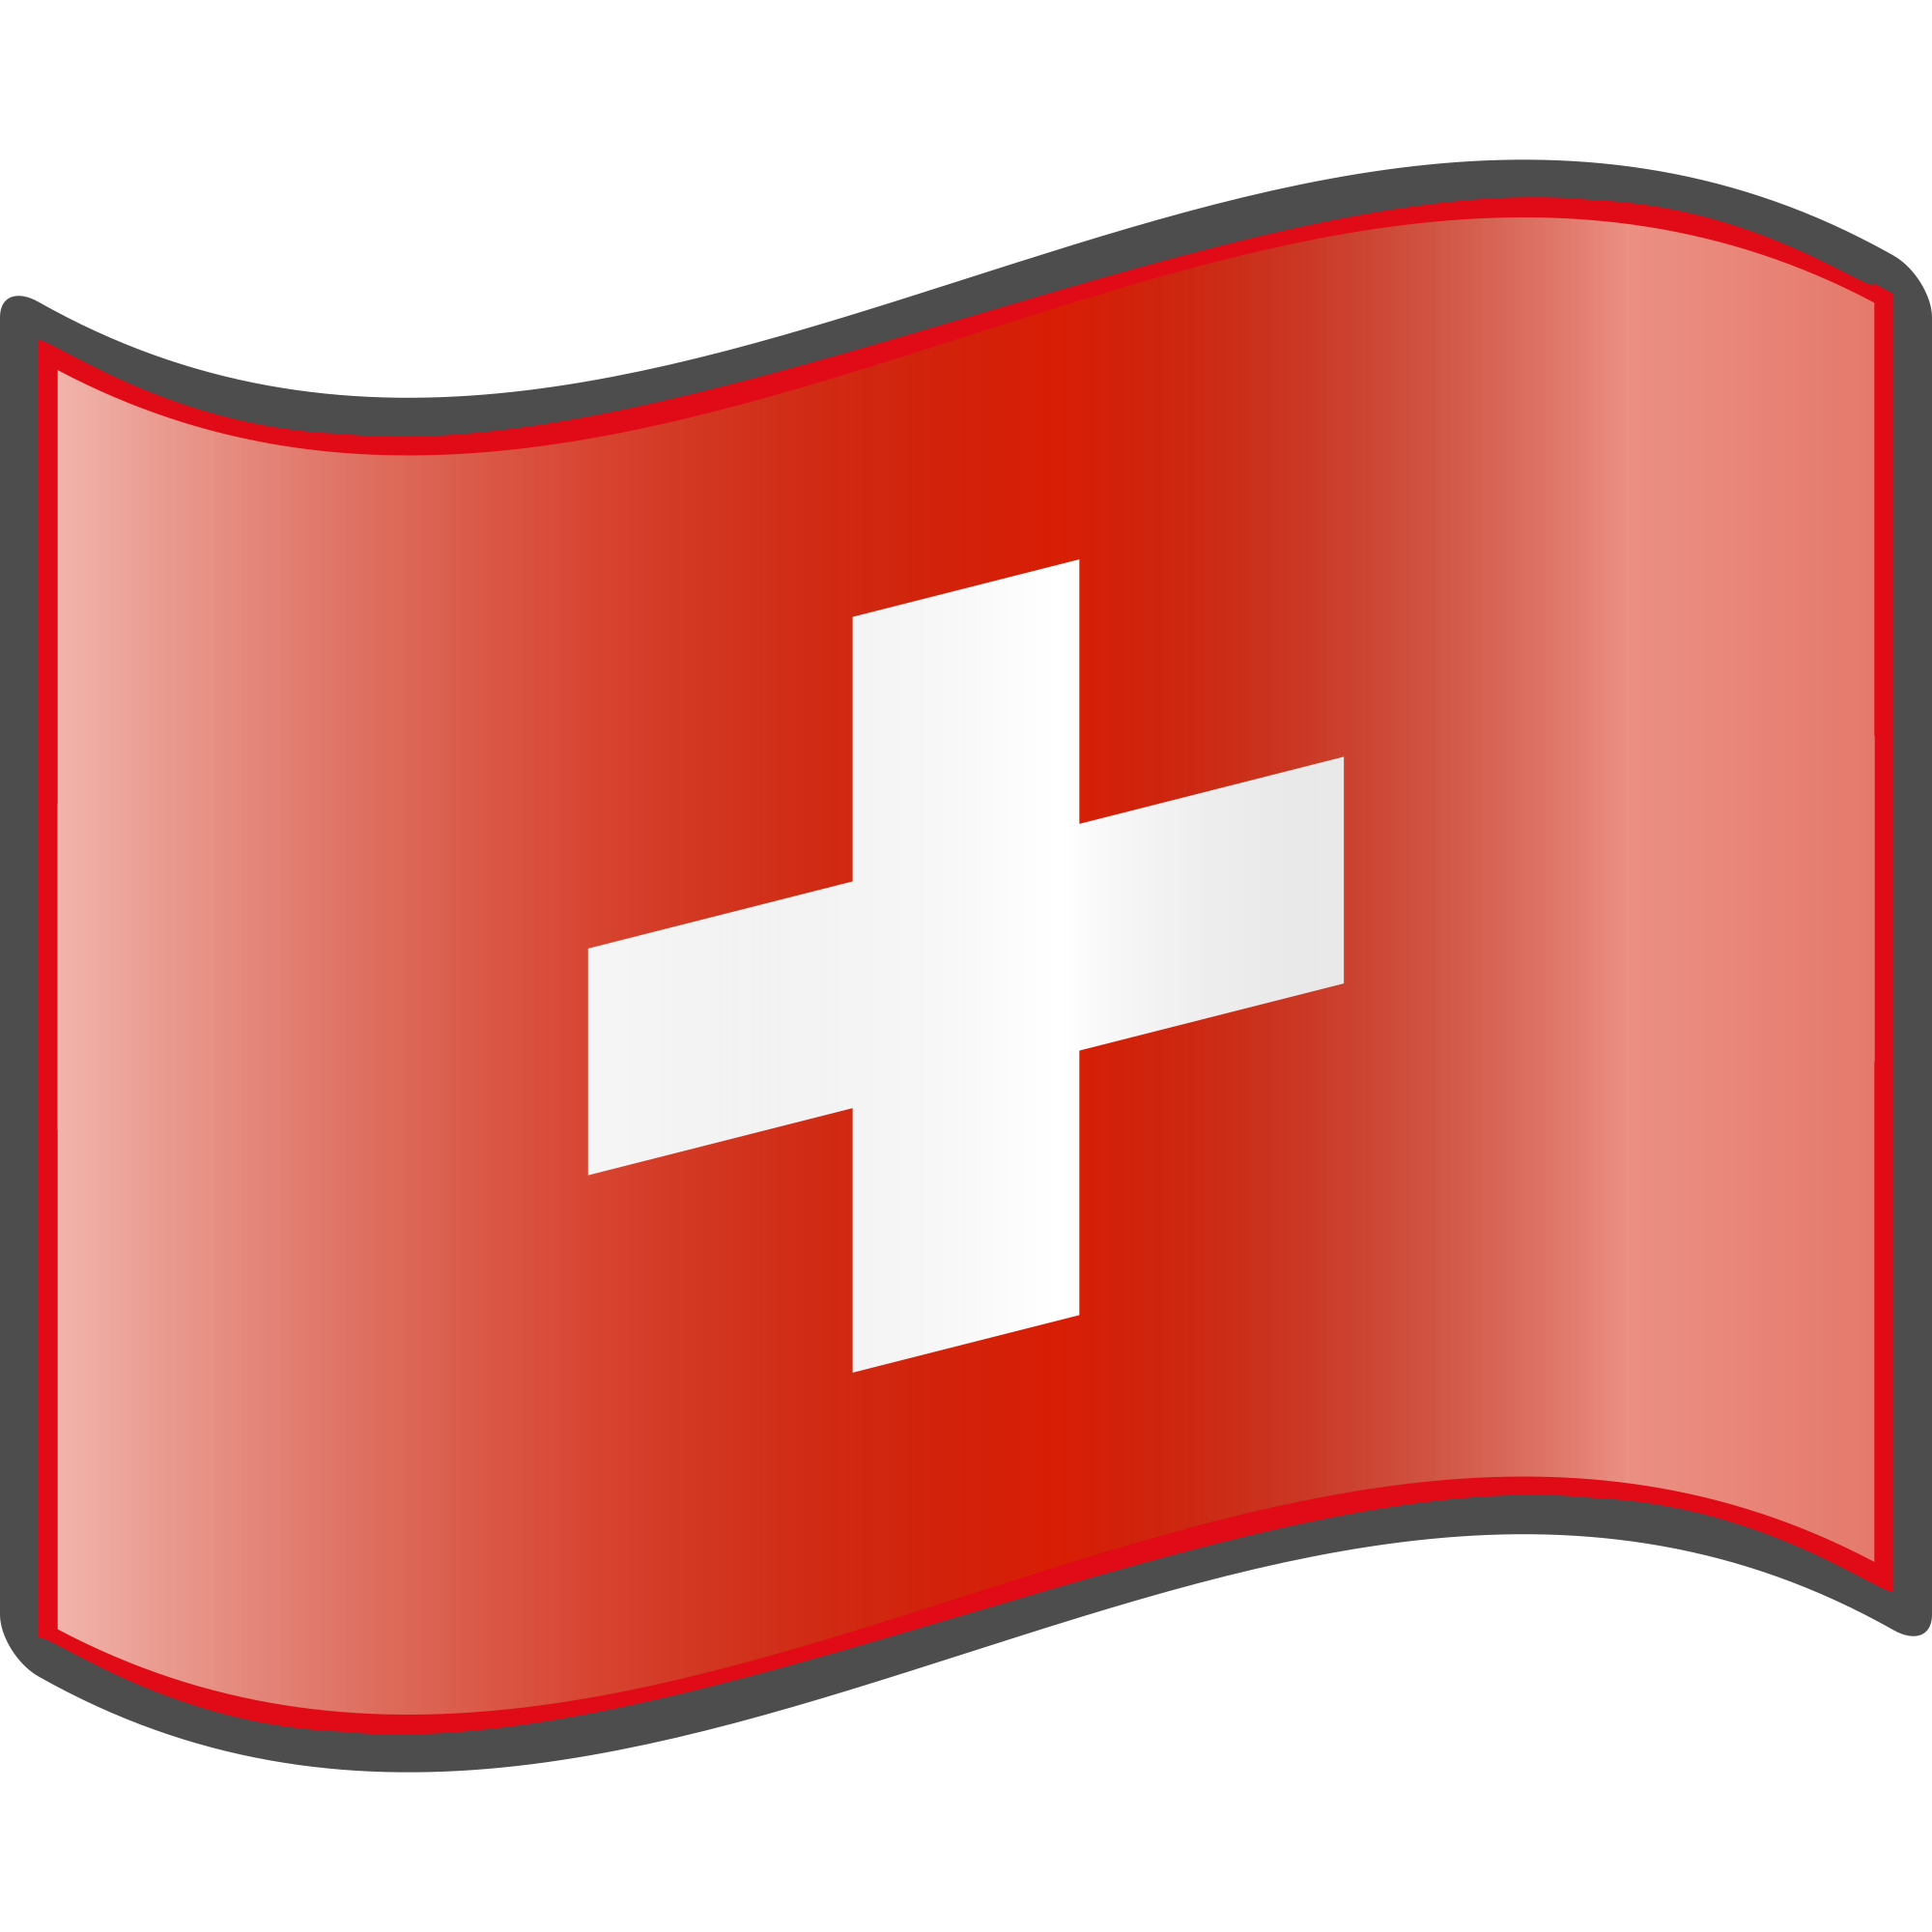 Swiss Flag clipart #17, Download drawings